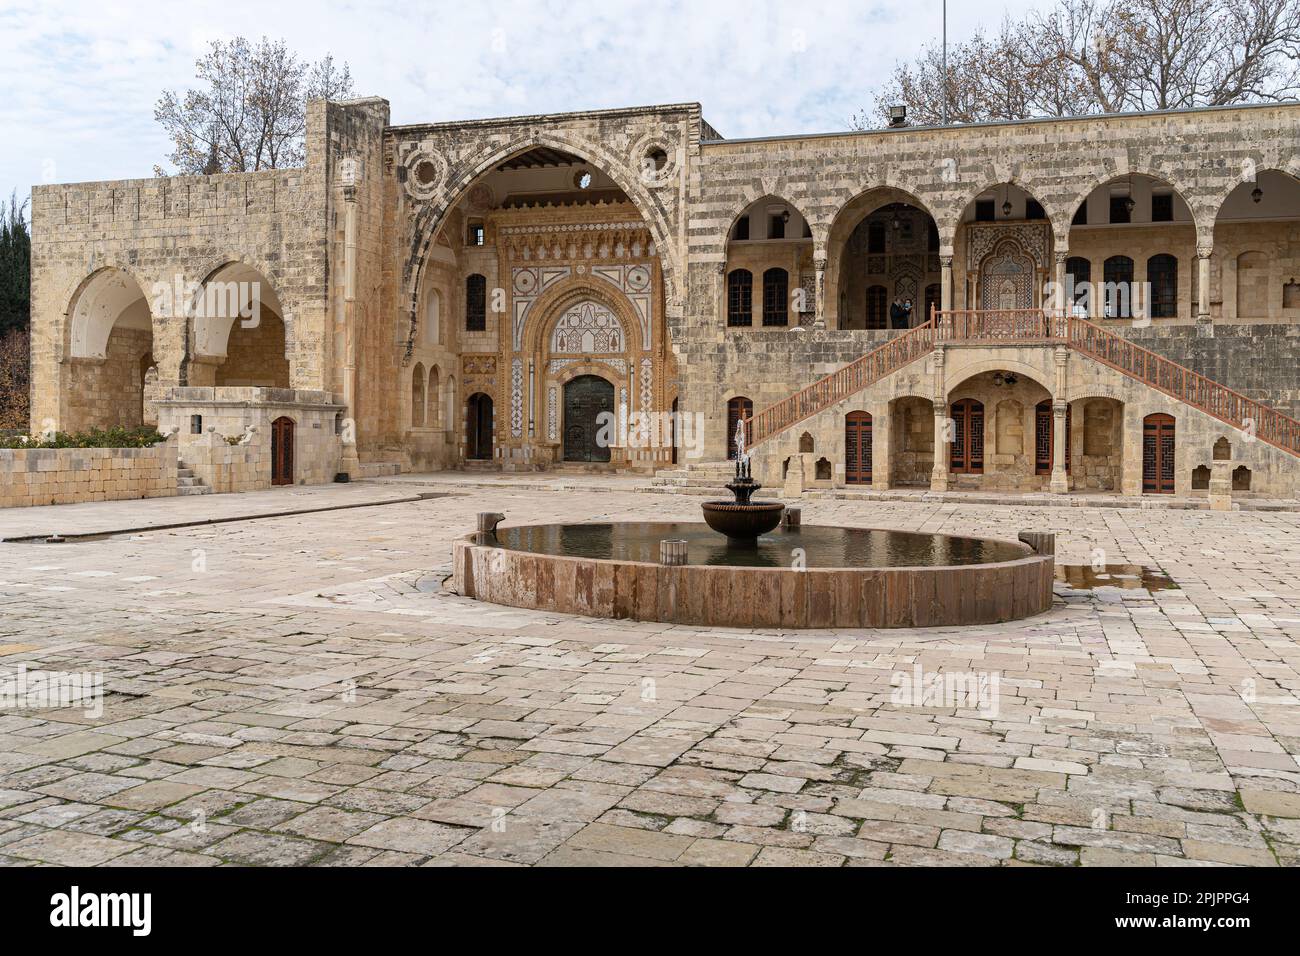 Old historic Beiteddine Palace courtyard with fountain, traditional Lebanese architecture, Lebanon Stock Photo